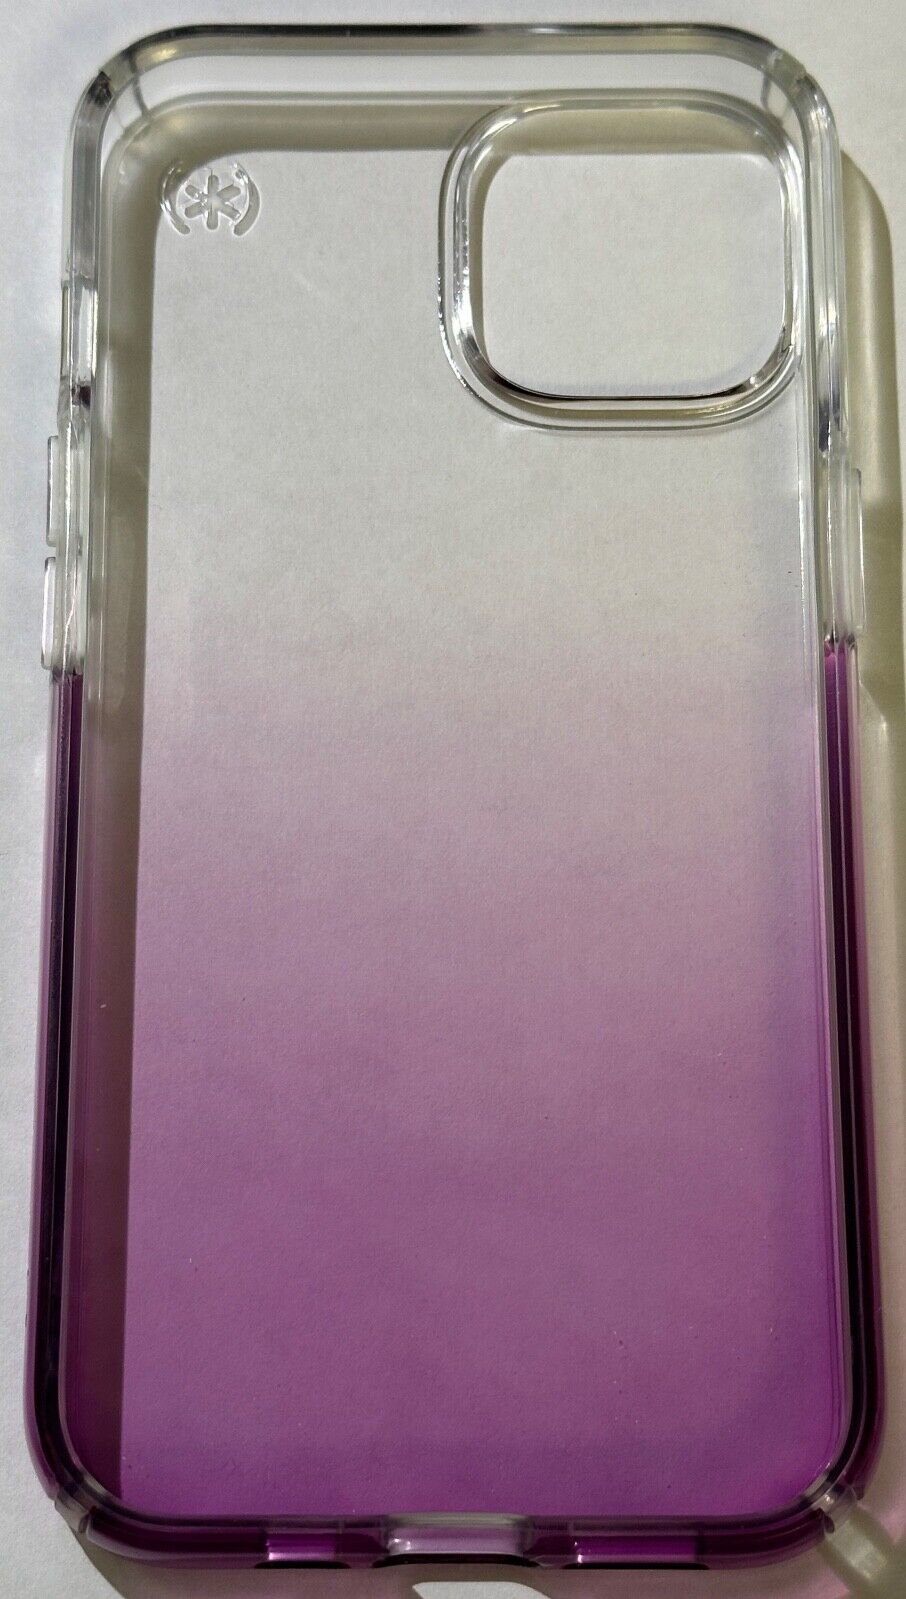 USED Speck Presidio Perfect-Clear Ombre Case Apple iPhone 13 (6.1" Small Cam) VG